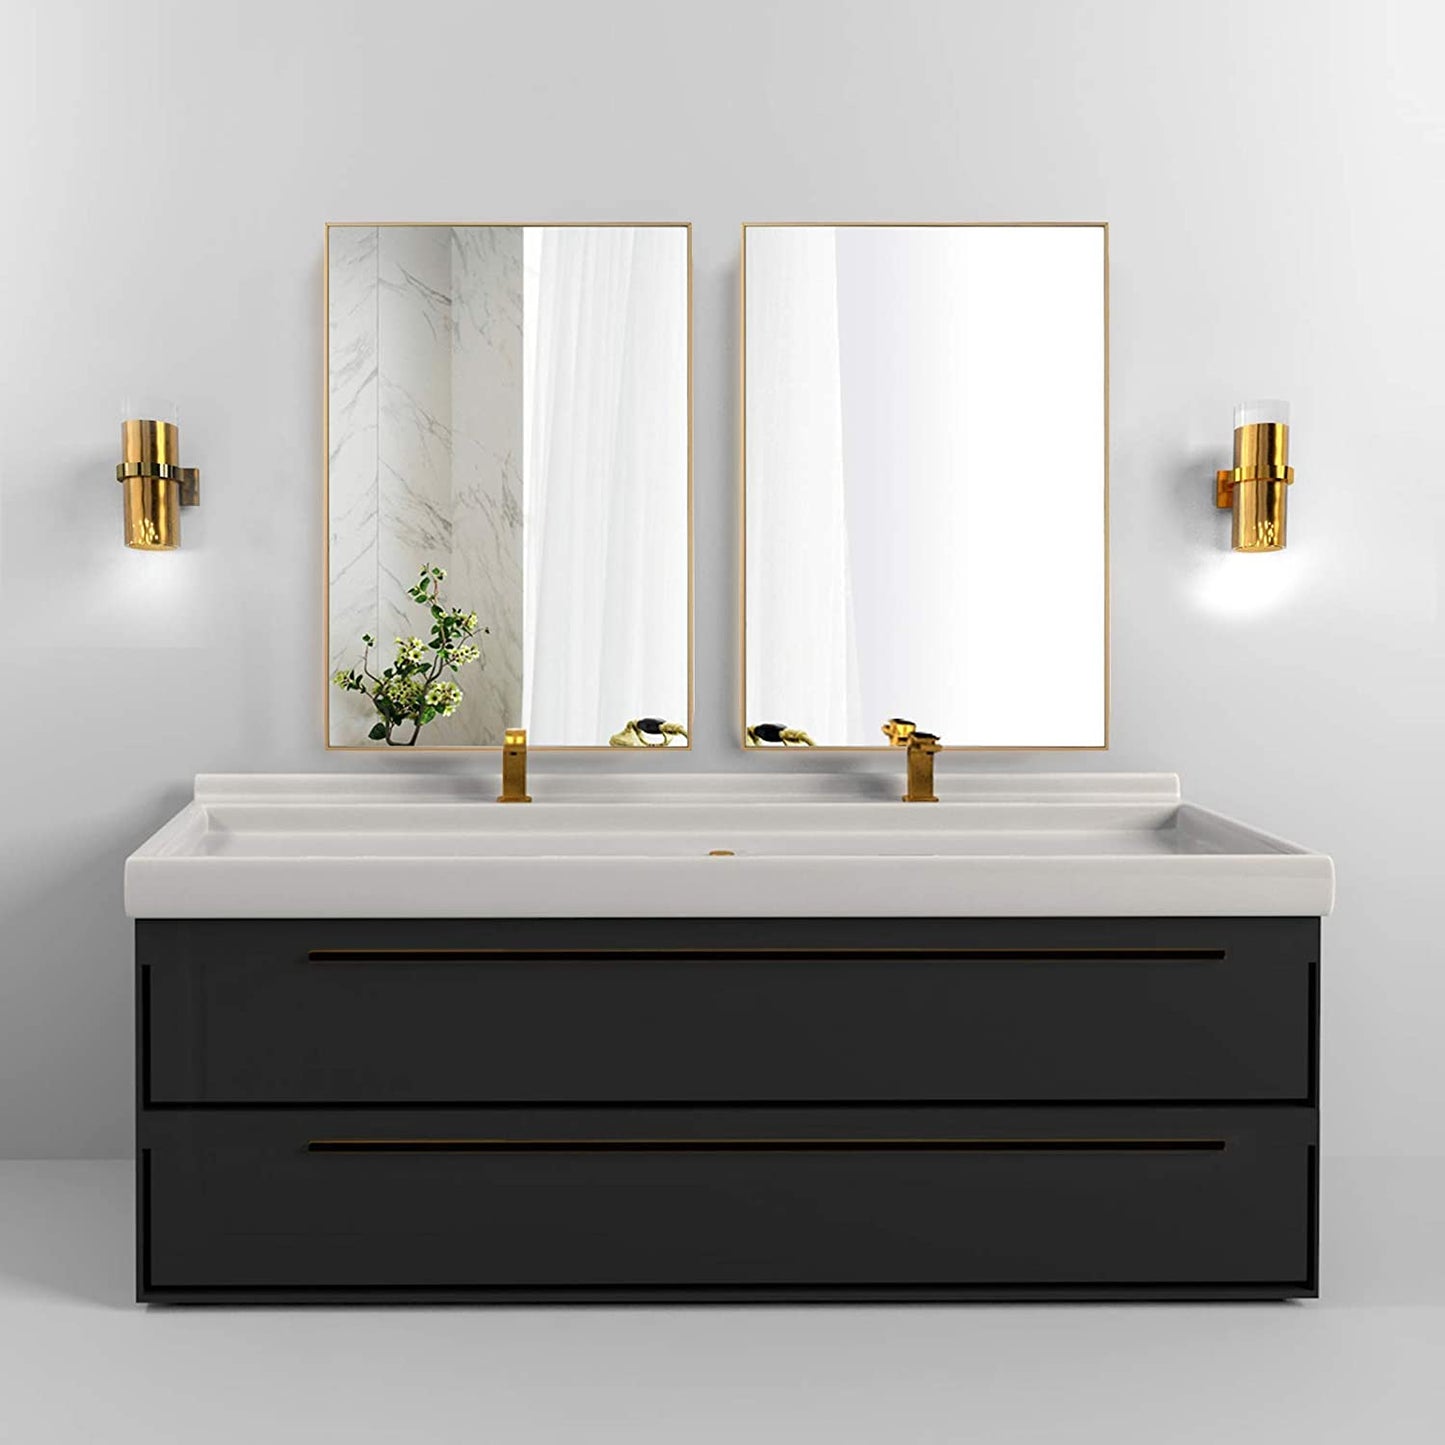 Rectangular HD Mirror|Wall Mirrors by Sam Home Collection|16x22inch